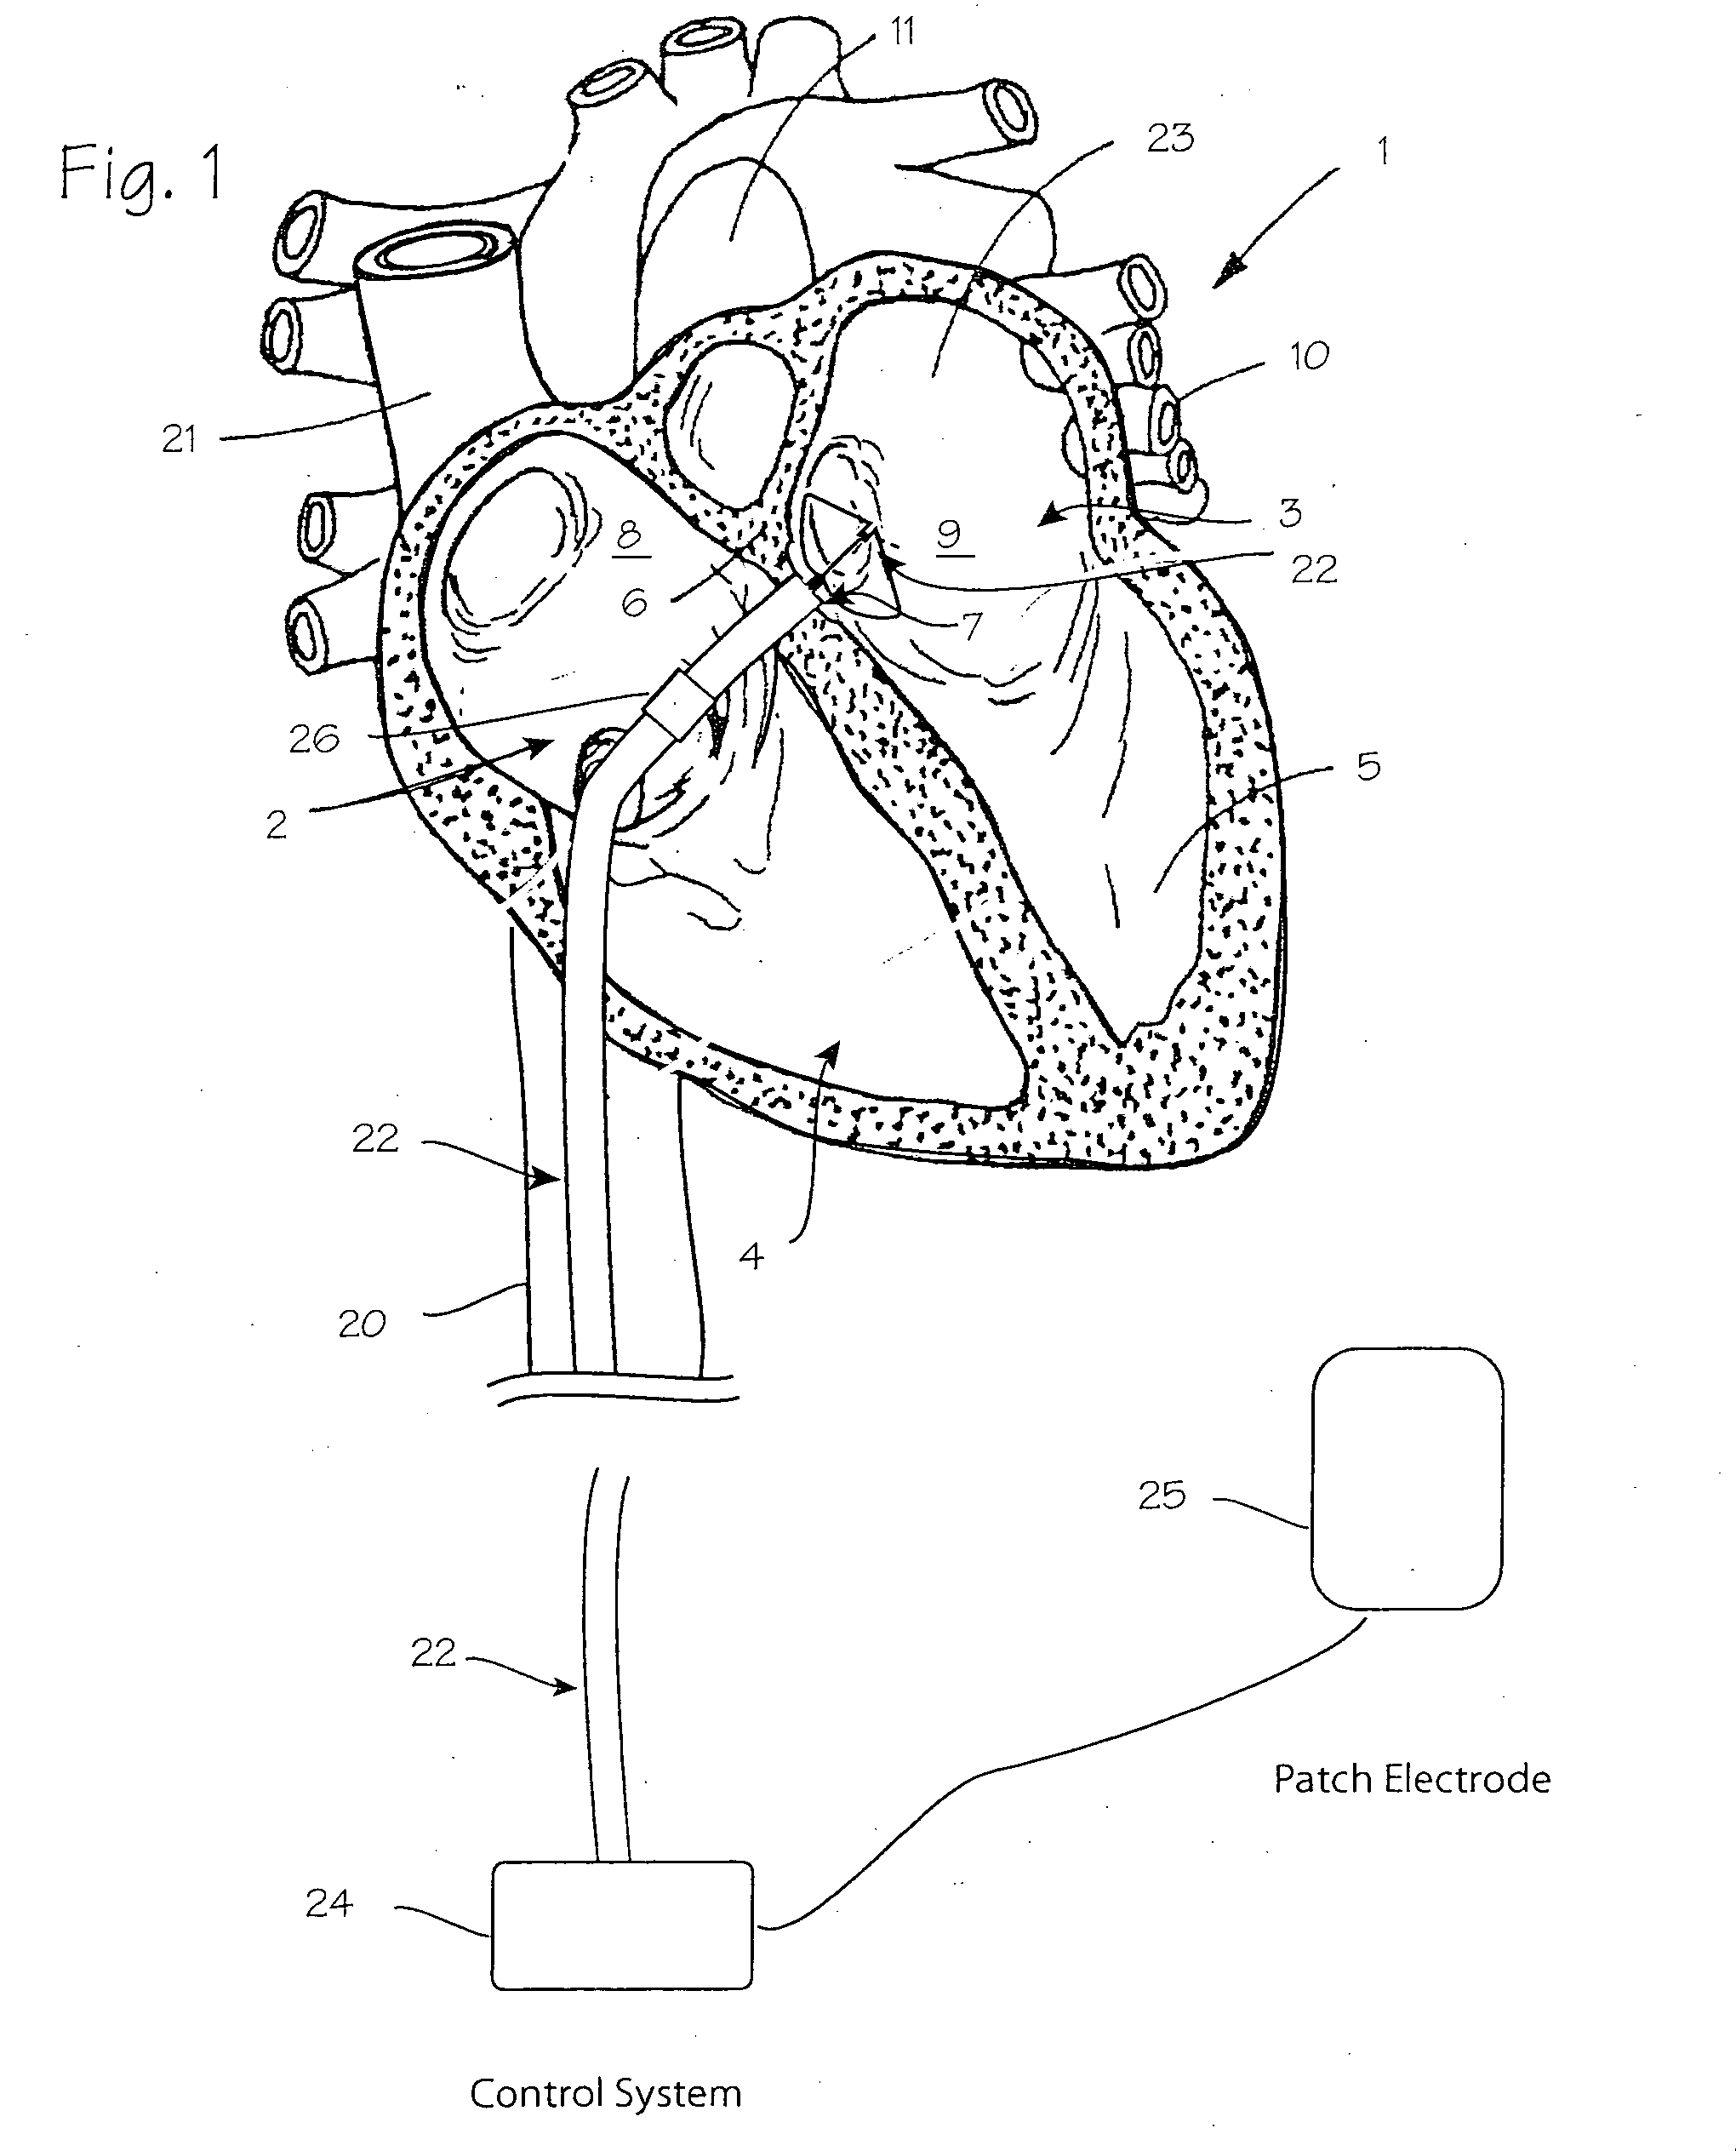 Atrial ablation catheter adapted for treatment of septal wall arrhythmogenic foci and method of use